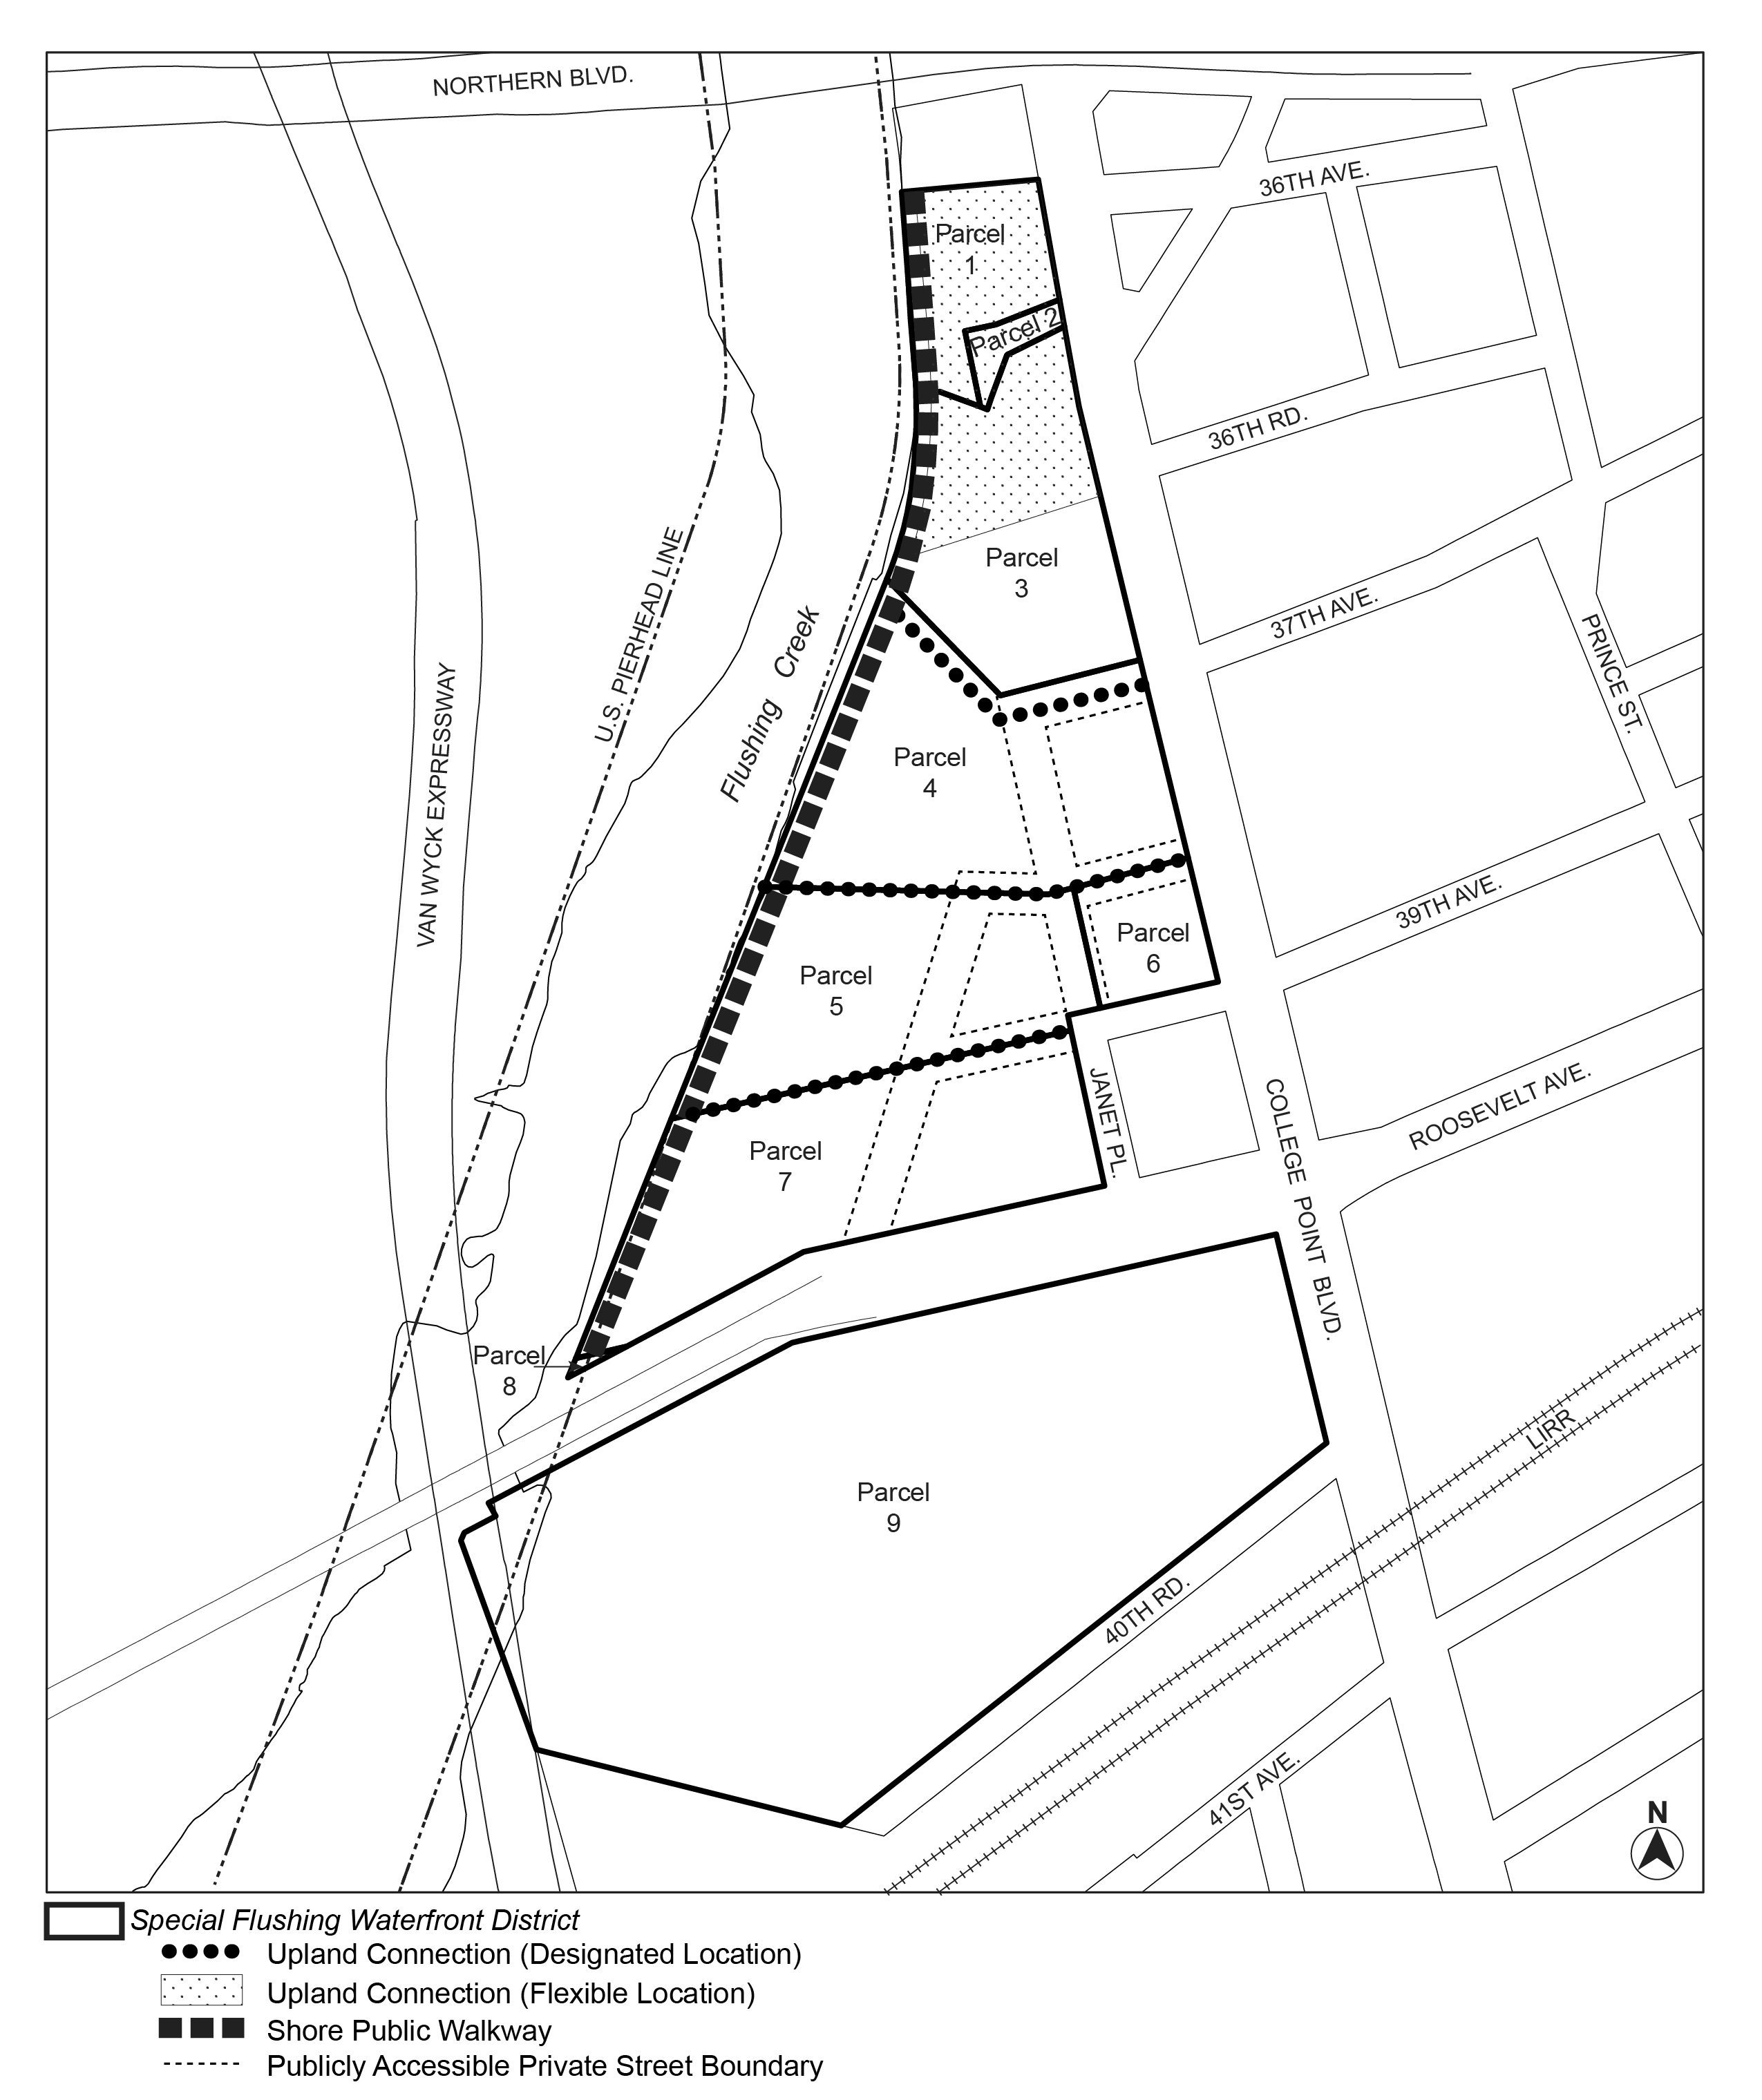 Map 6. Waterfront Access Plan: Public Access Areas